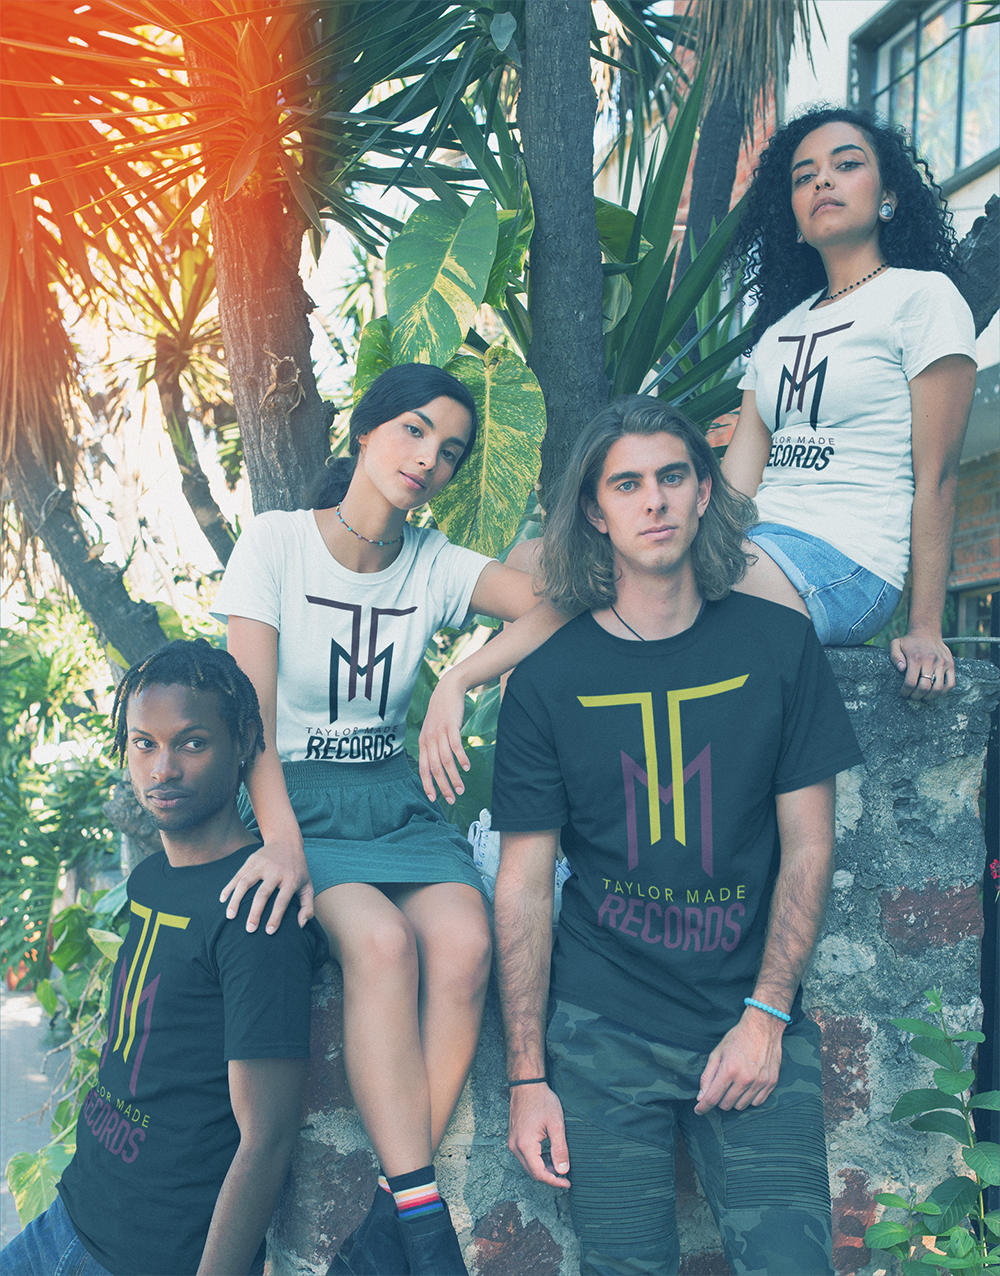 interracial-group-of-friends-wearing-t-shirts-mockup-near-plants-a20092.png